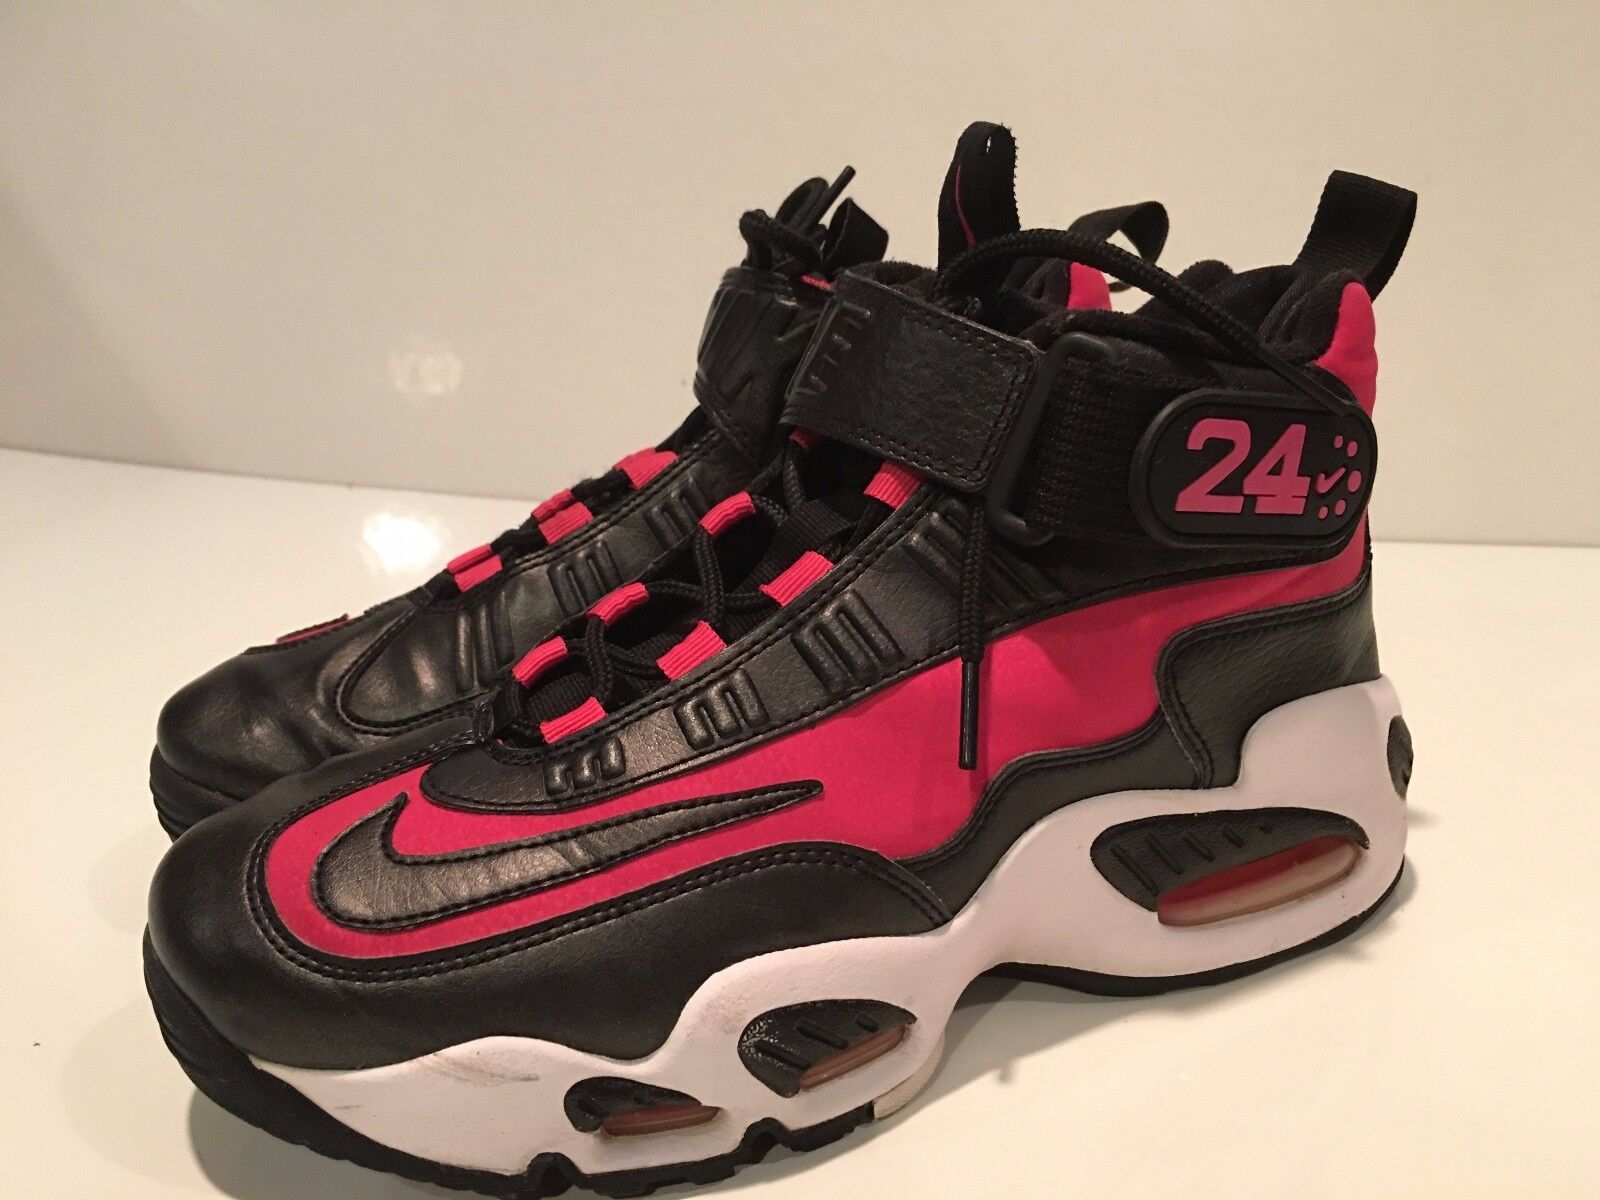 2010 Nike Air Griffey Max 1 Girls\' Black/Spark/White Basketball Shoes Youth Size